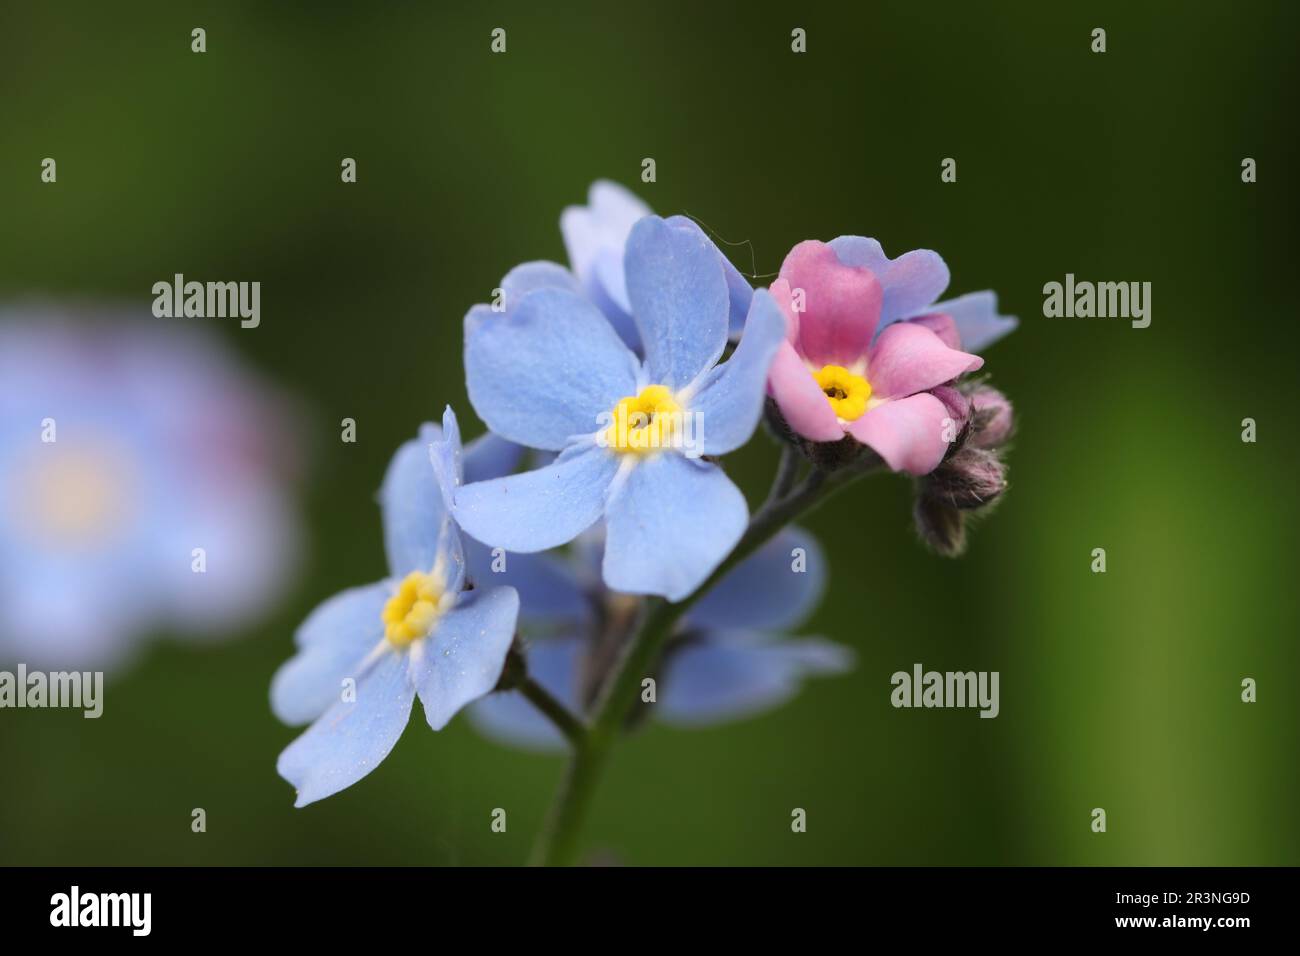 close-up of blue and light pink myosotis flowers against a blurry natural background, side view Stock Photo